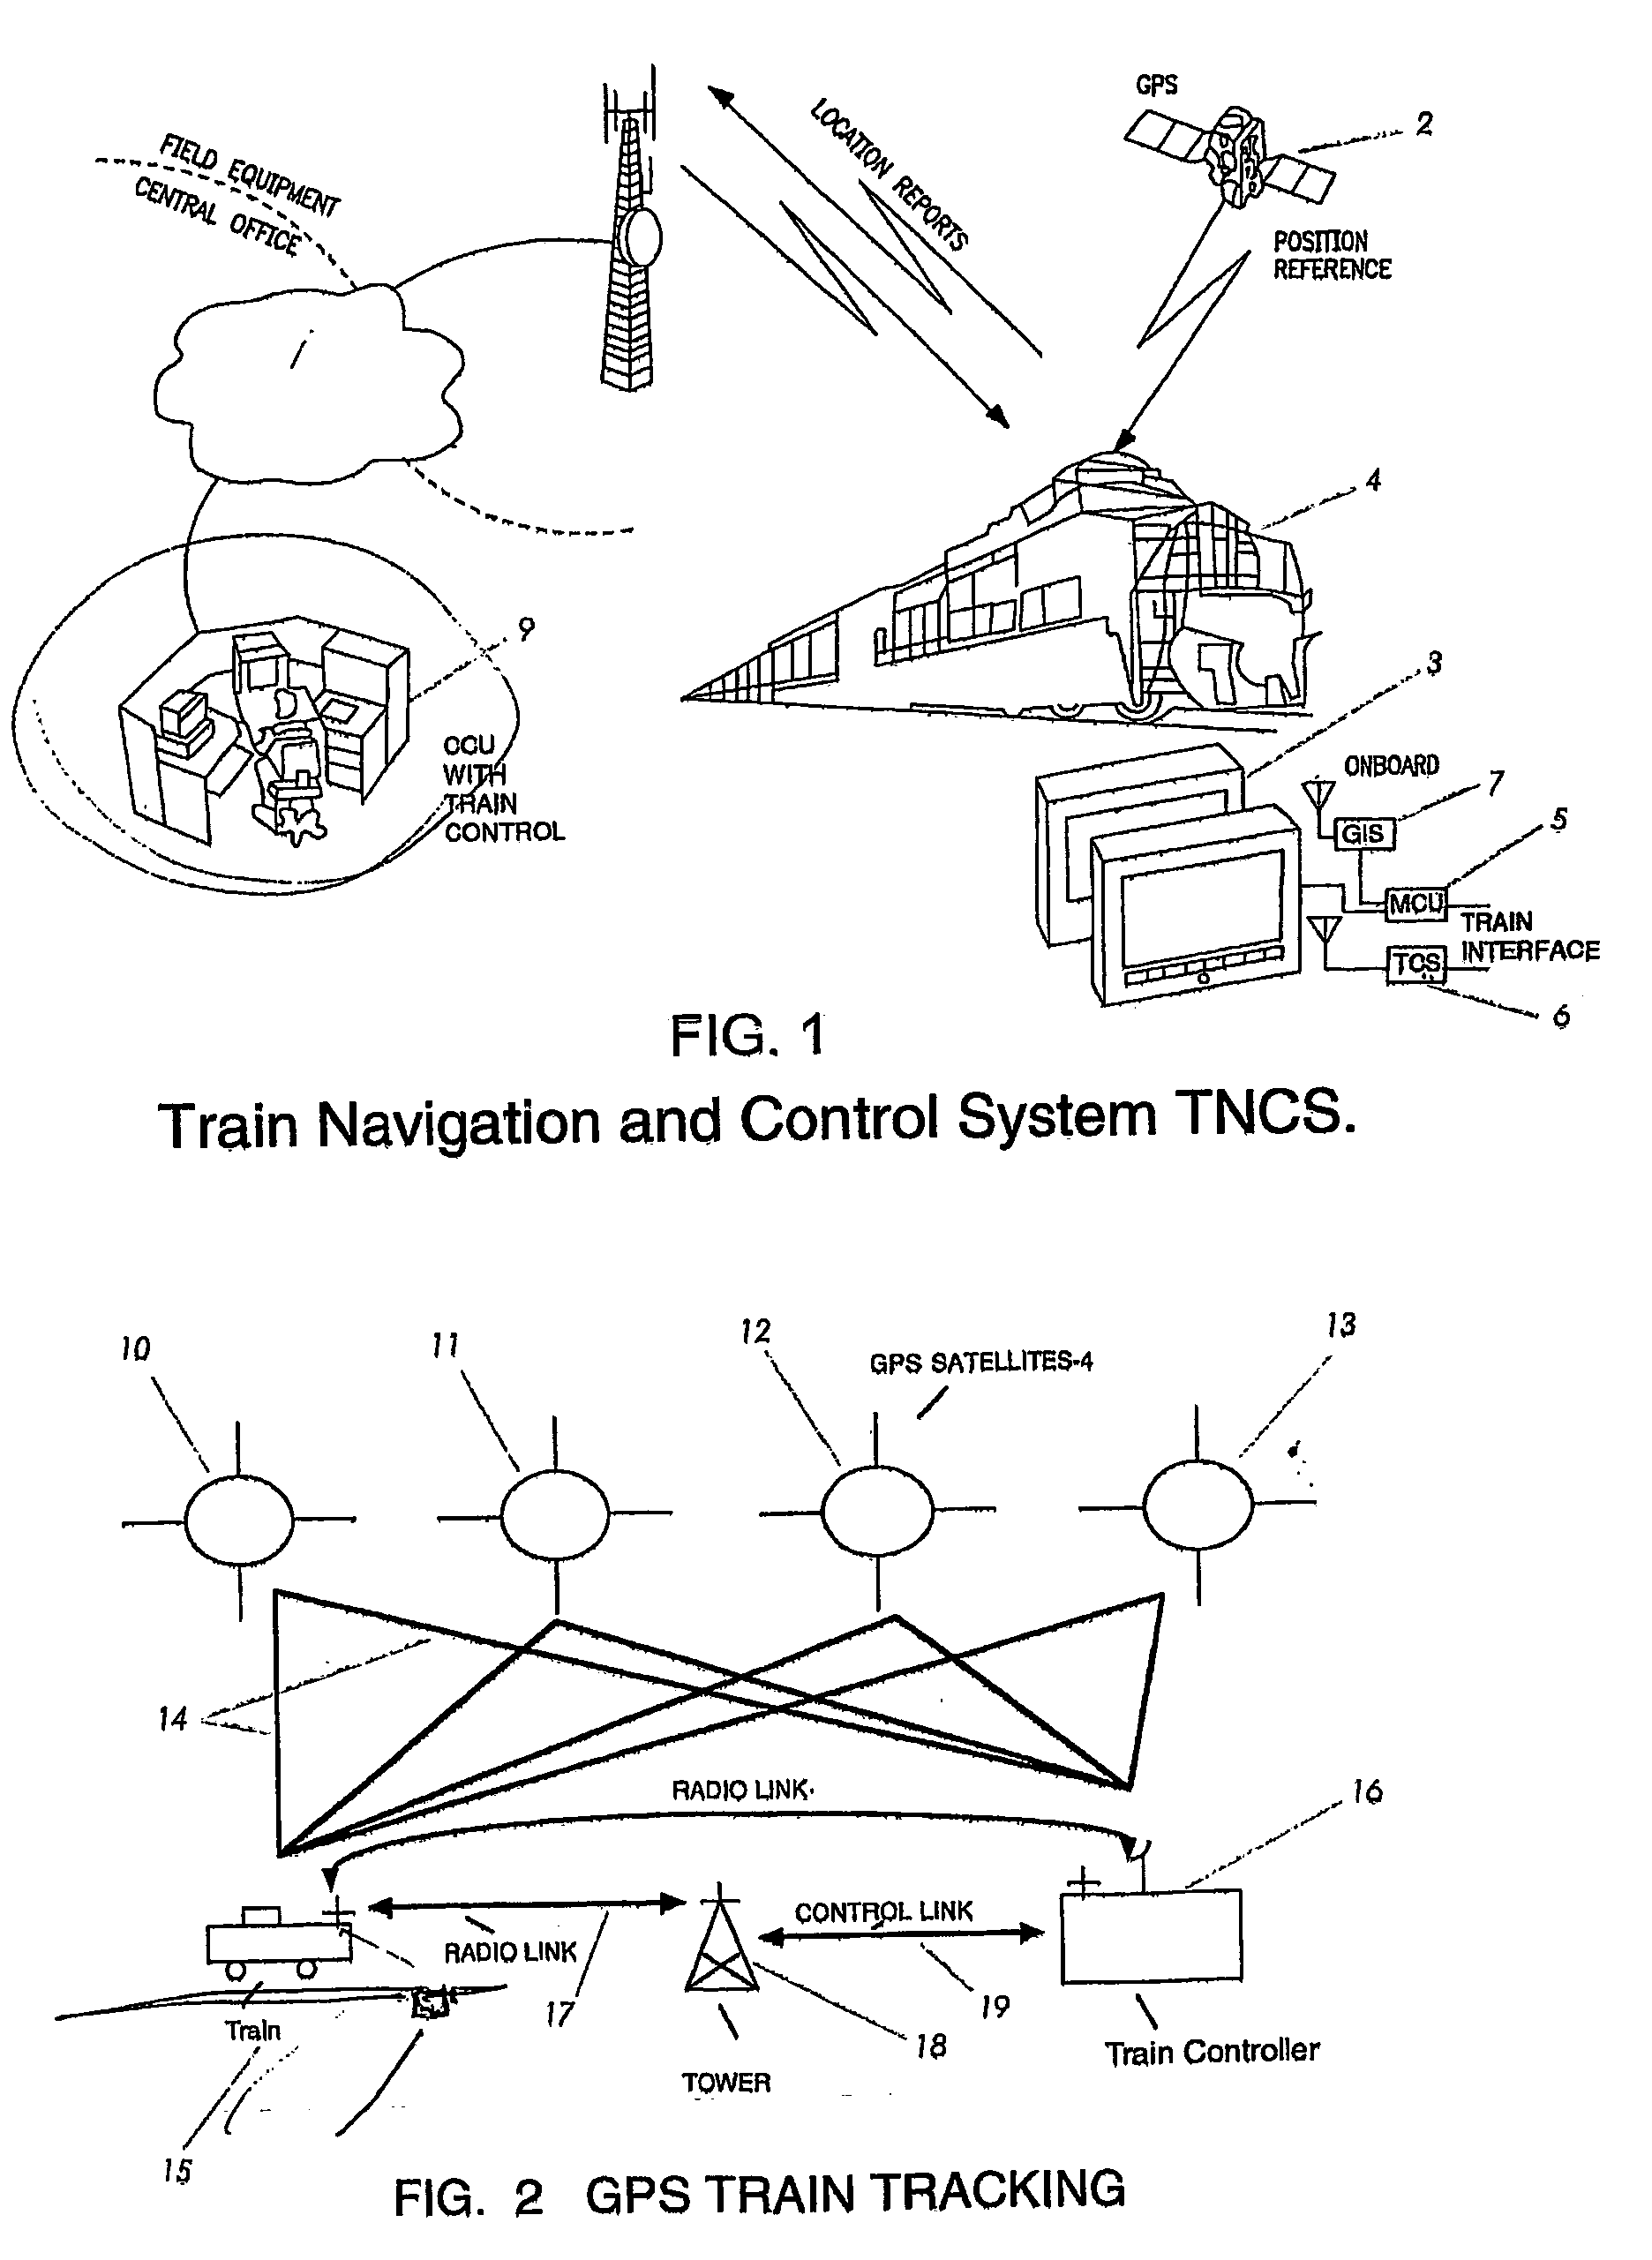 Vehicle navigation, collision avoidance and control system